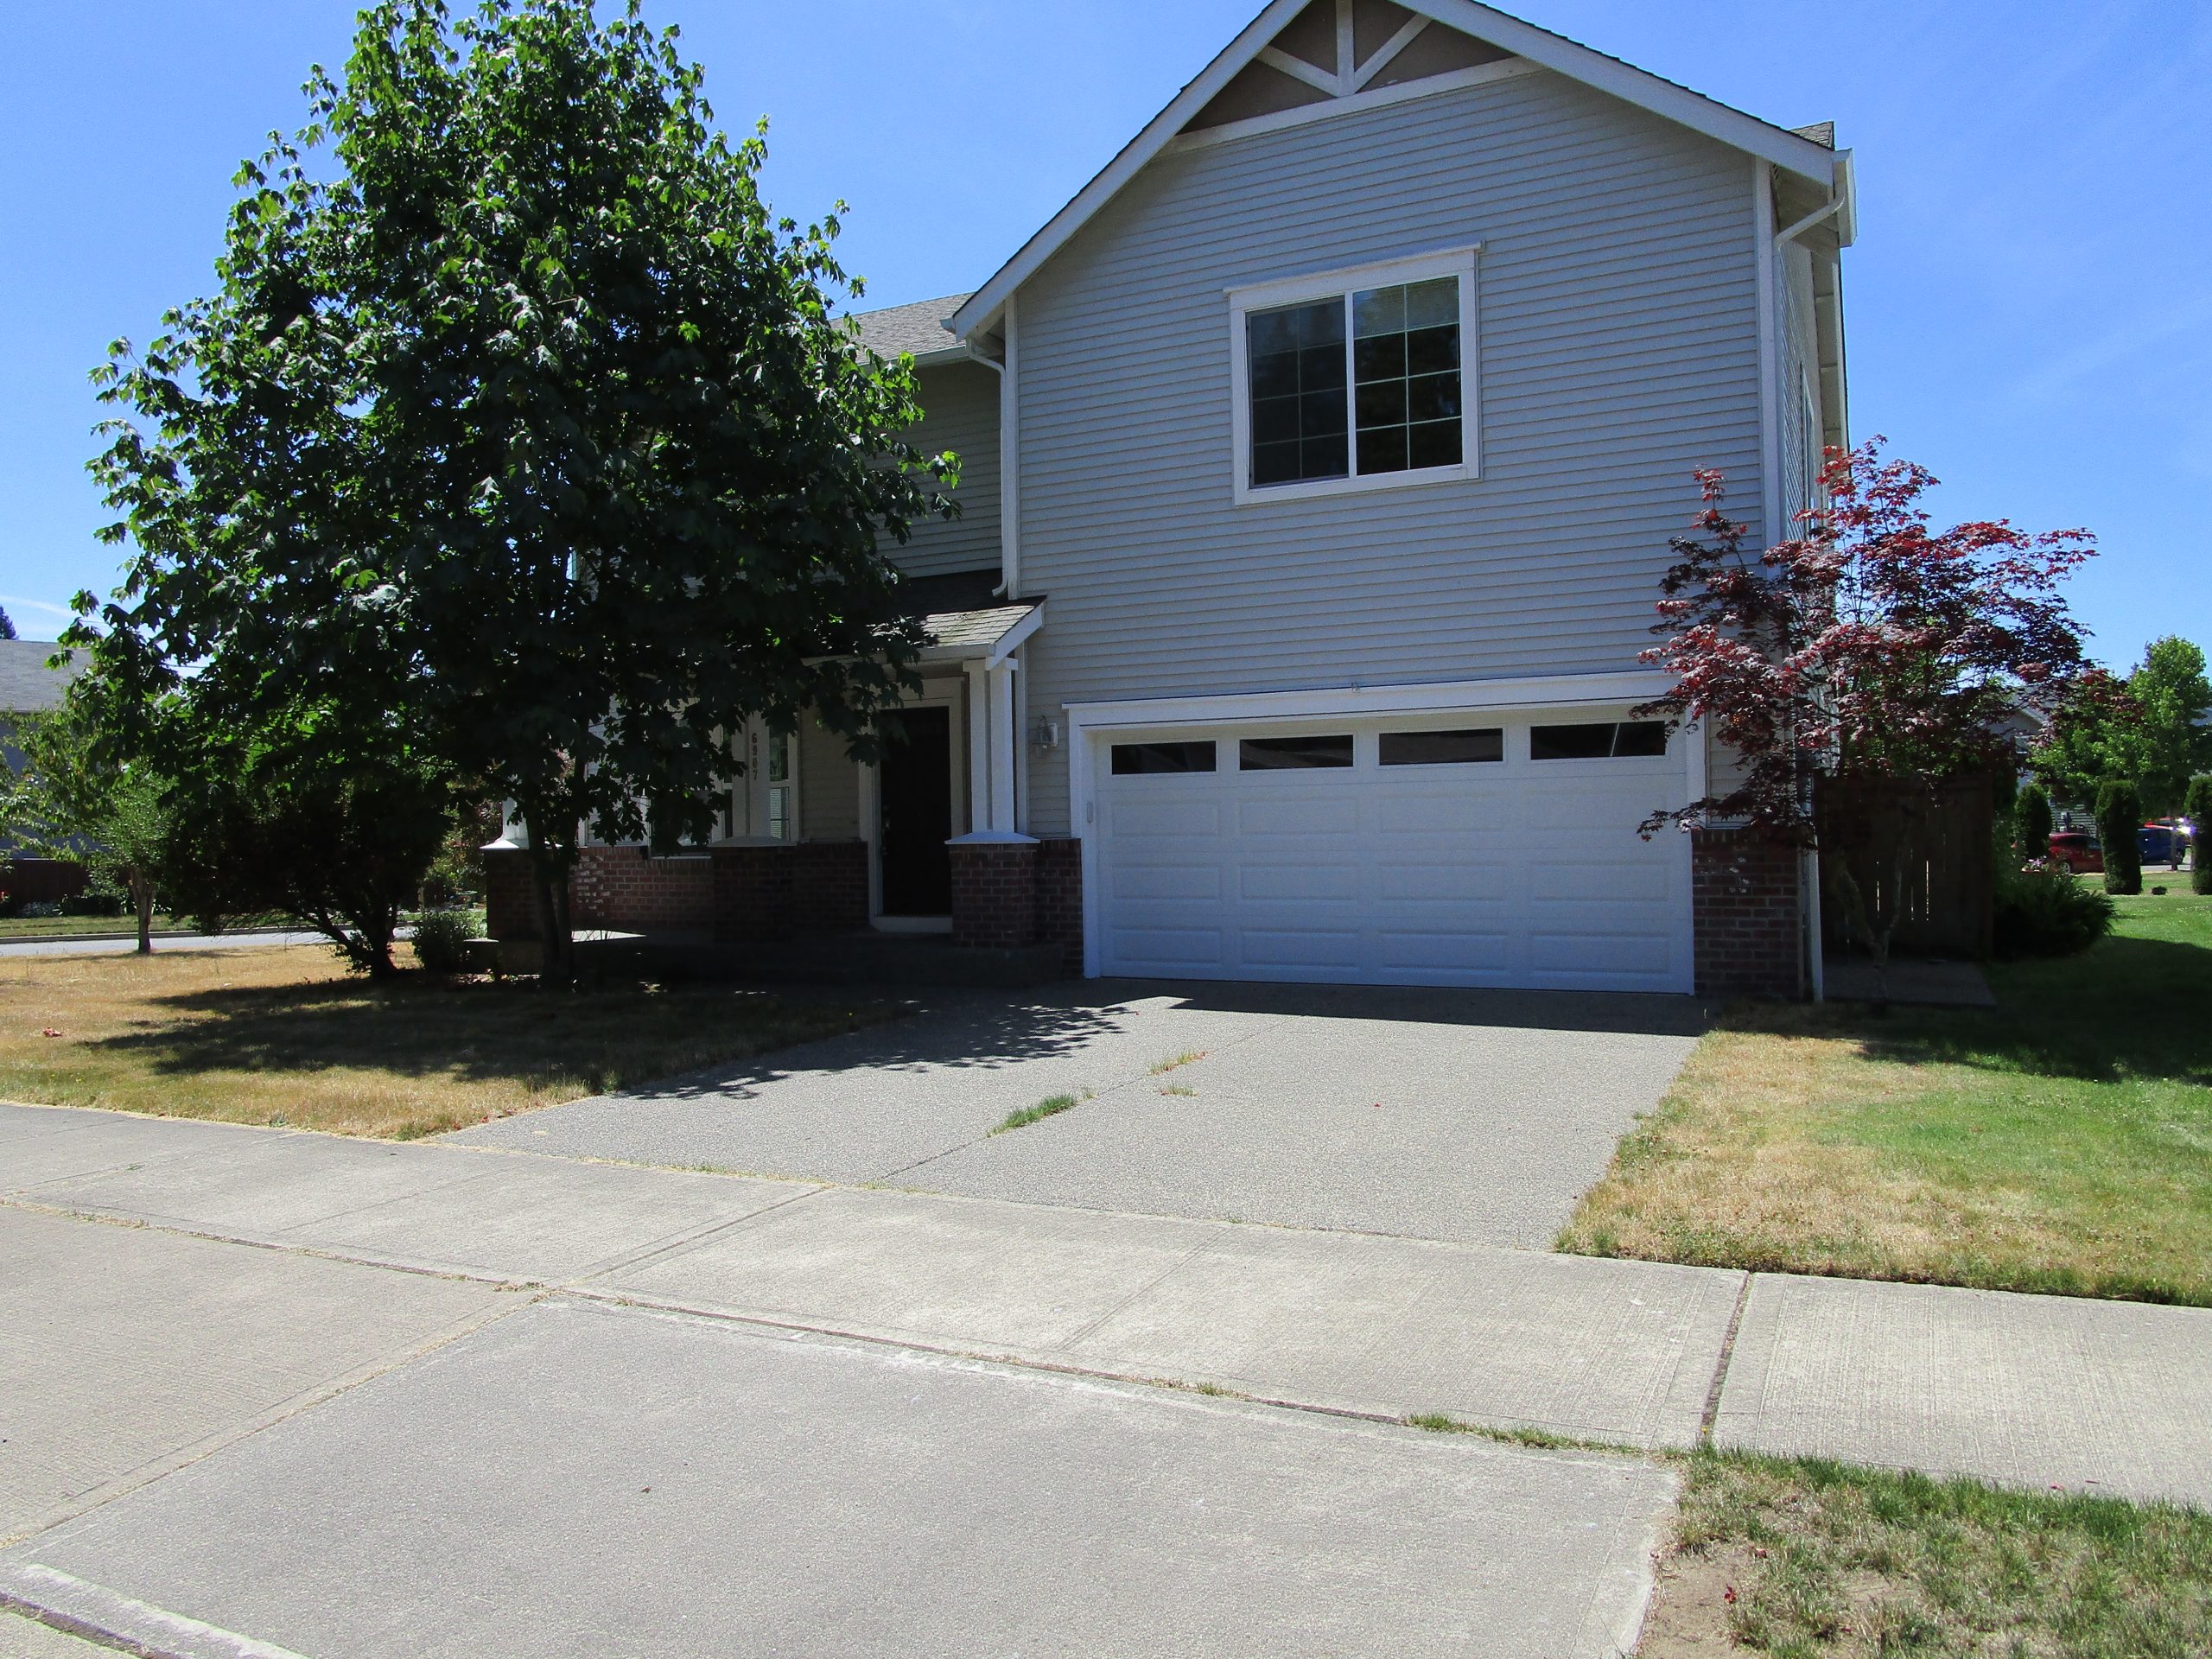 Large 3+ Bedroom on Corner Lot in Tumwater